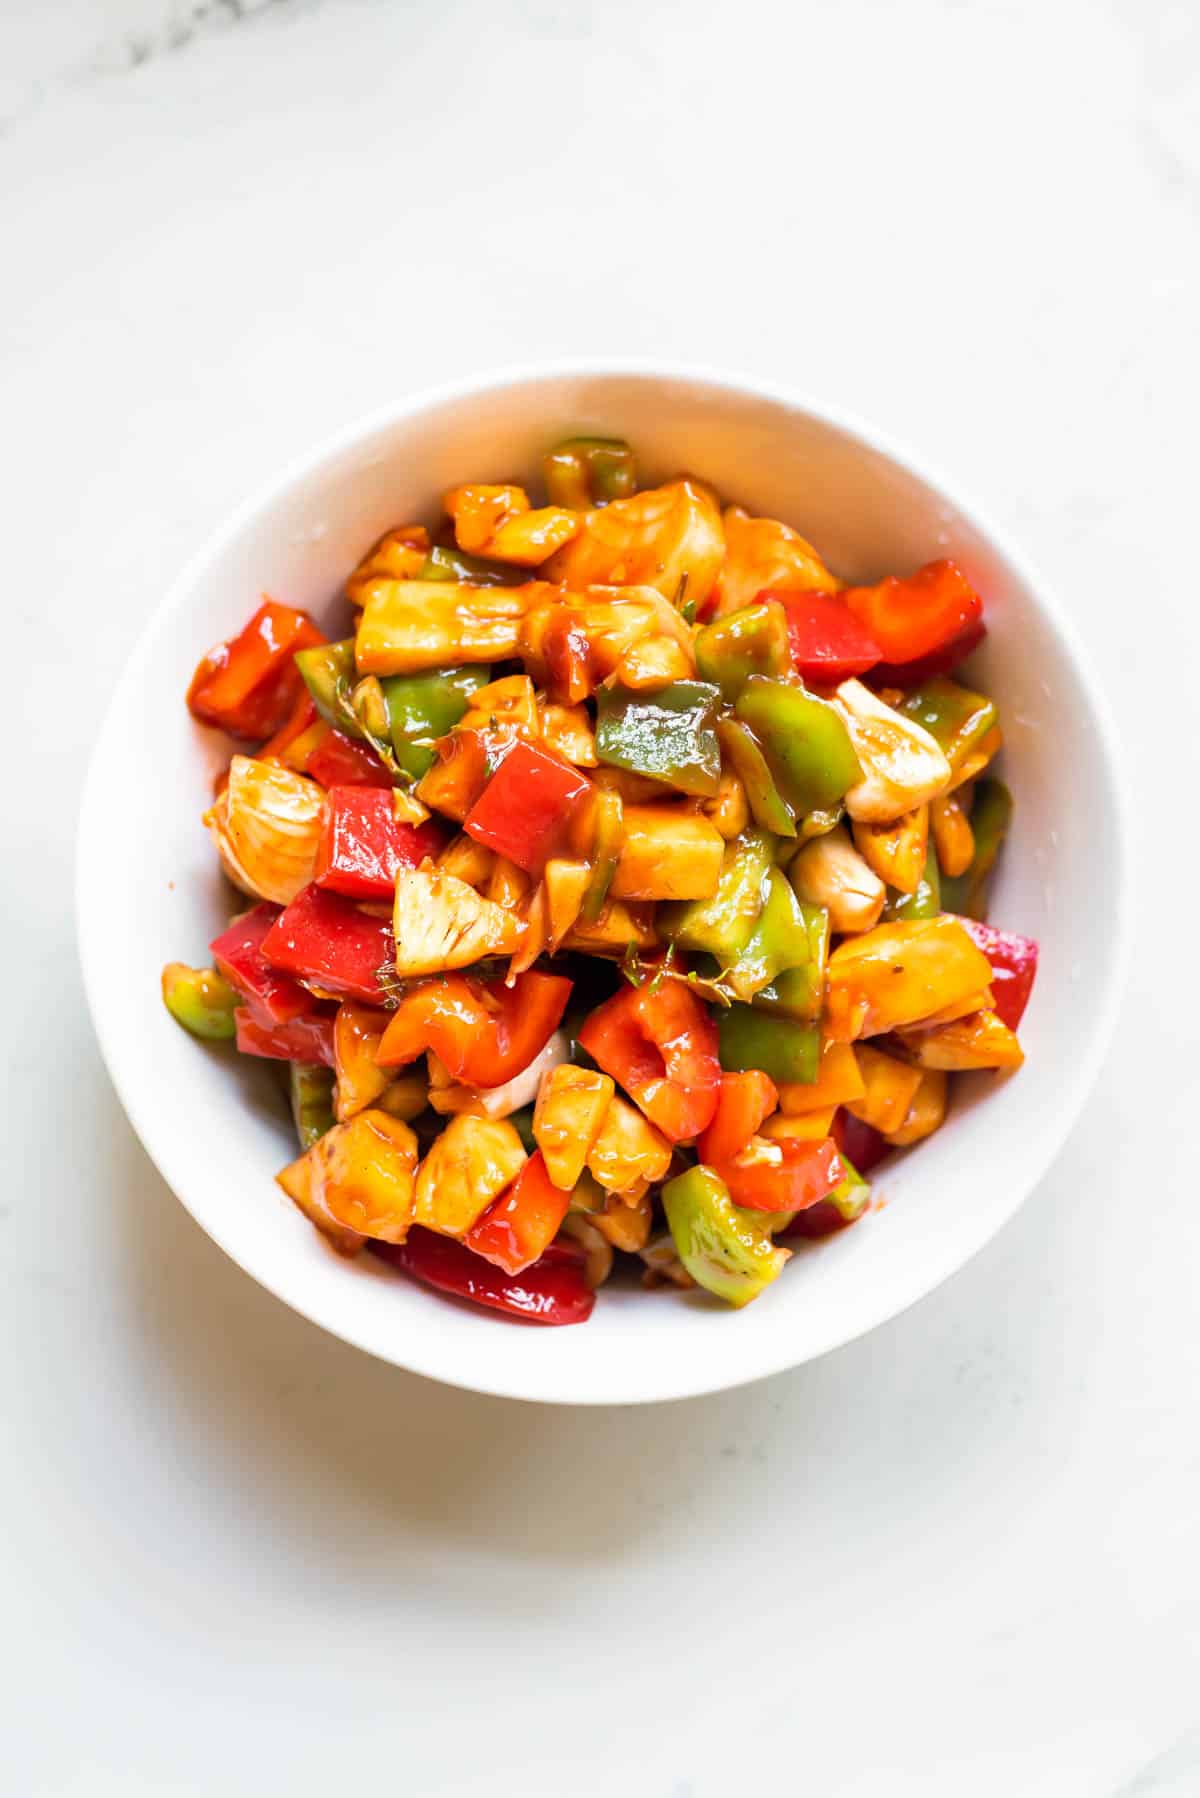 Tossed vegetables and pineapple in sauce in a white bowl.